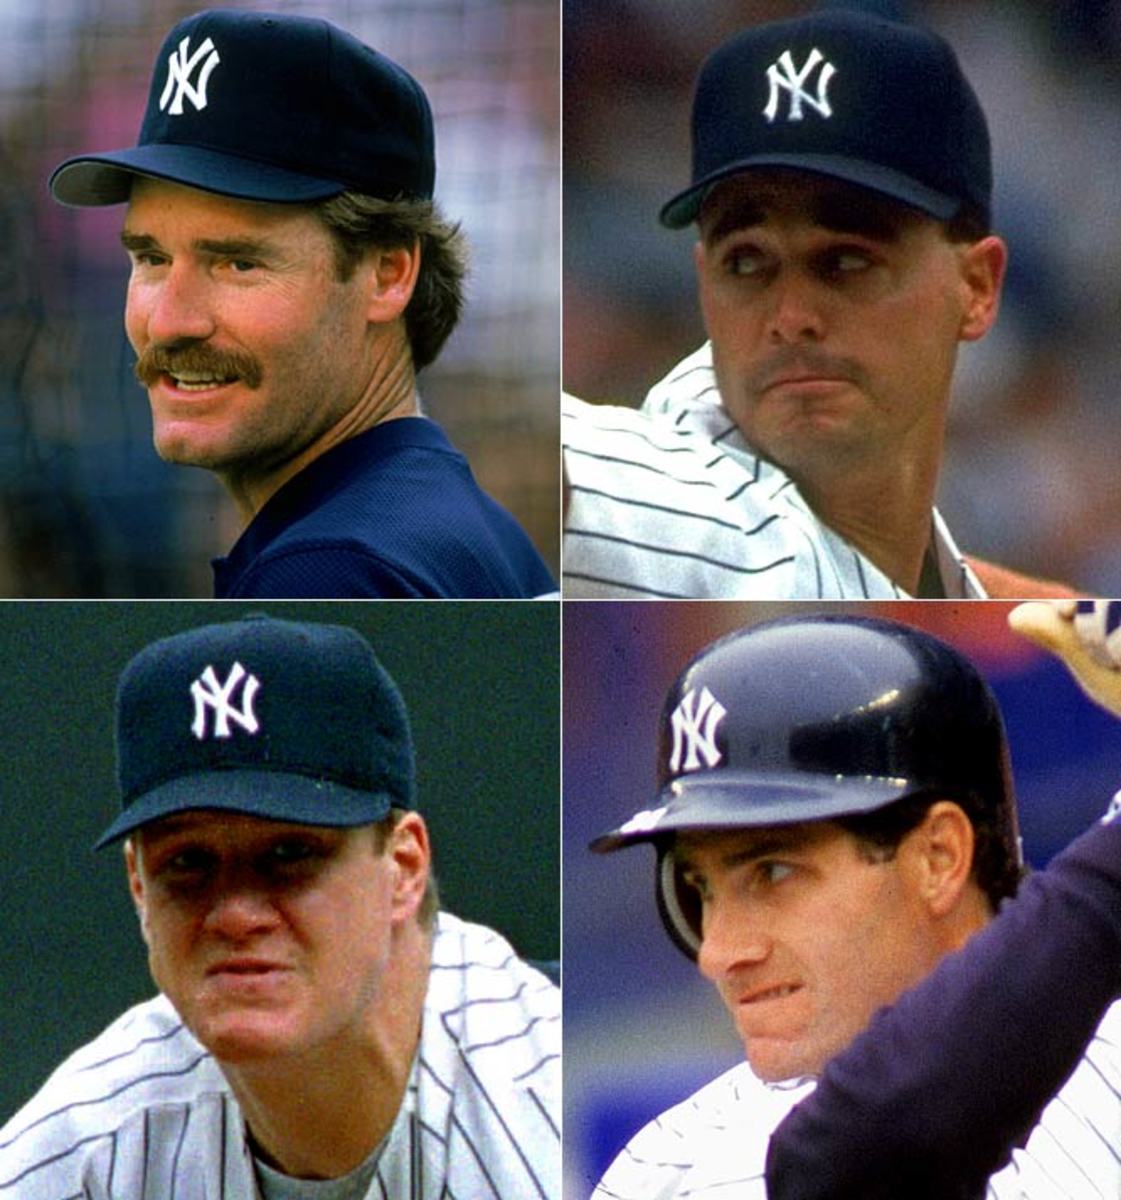 Wade Boggs, Jimmy Key, Jim Abbott, and Paul O'Neill